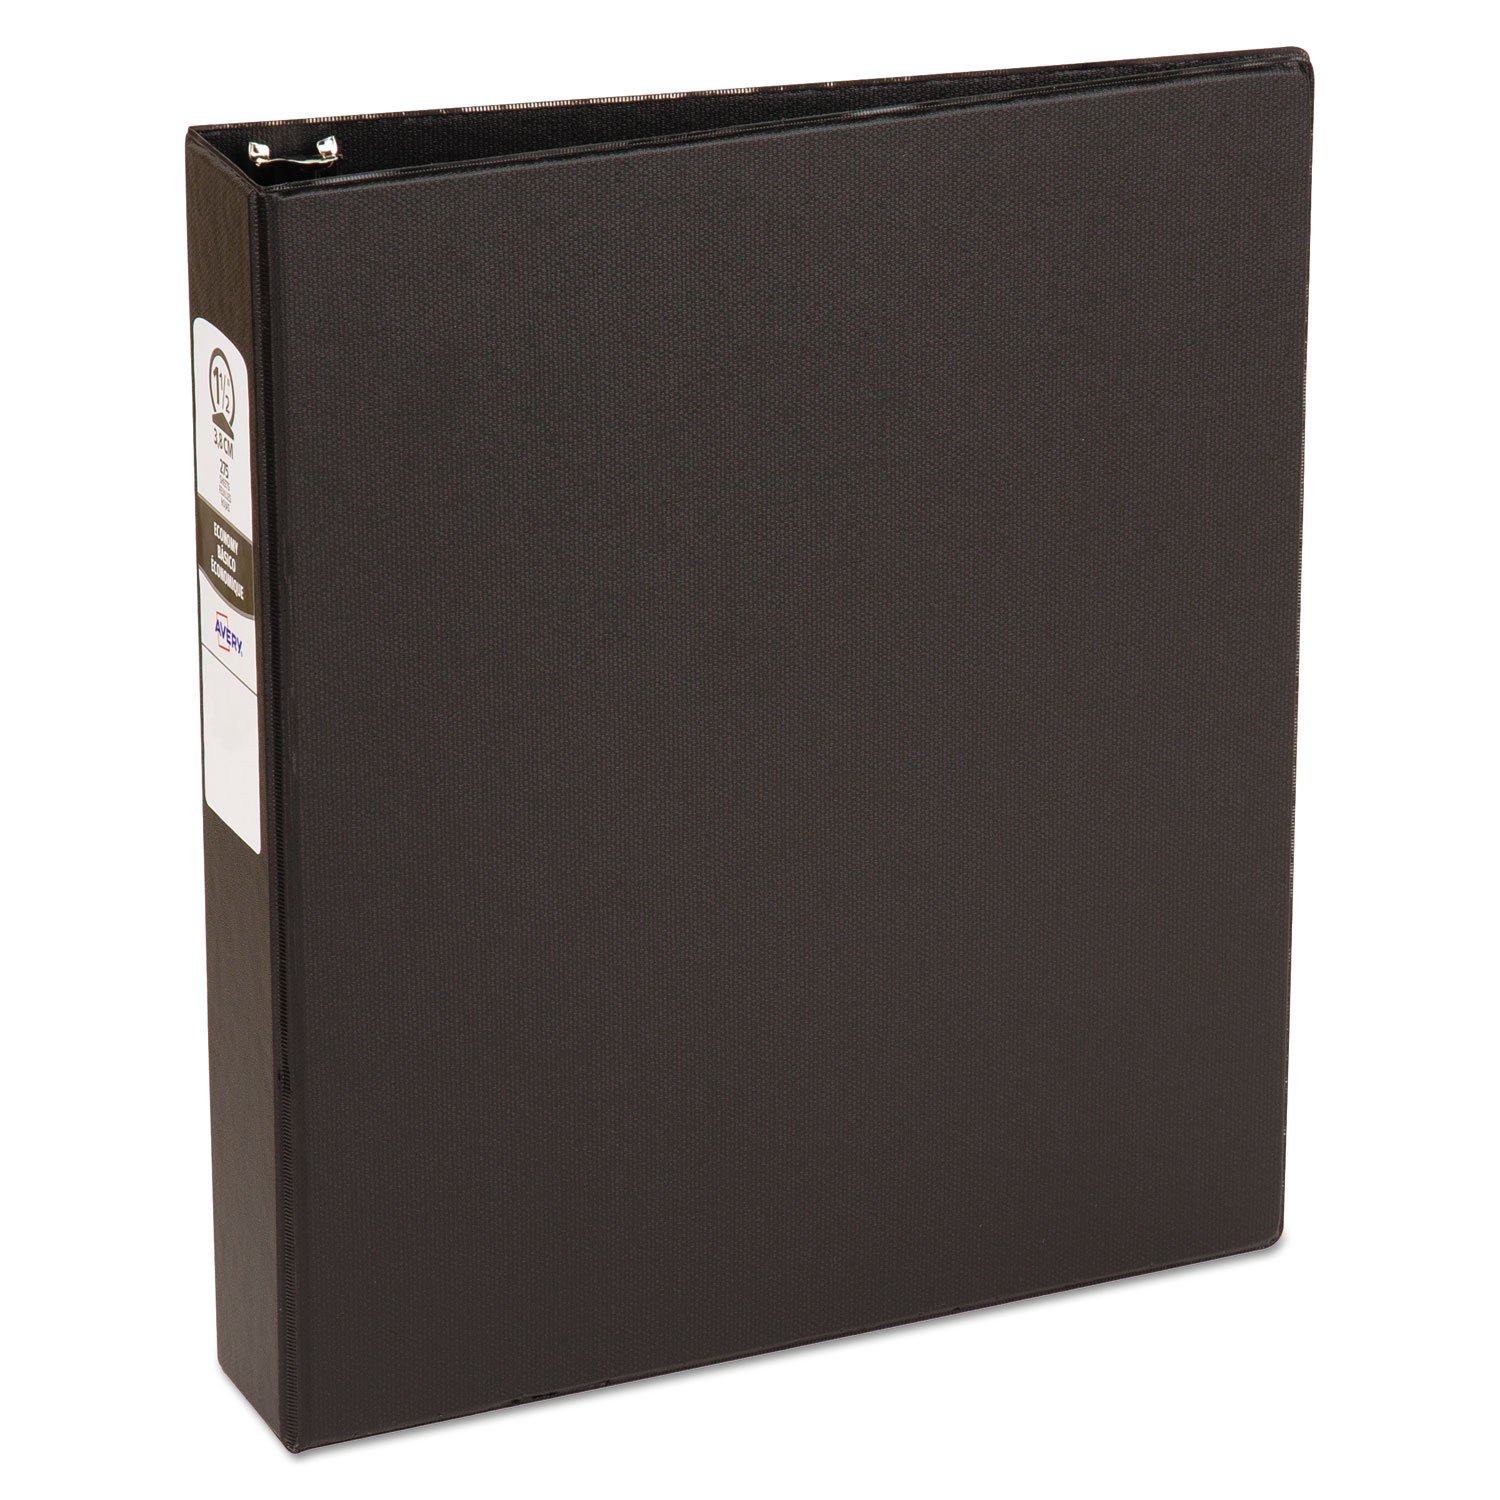  Avery 03401 Economy Non-View Binder with Round Rings, 3 Rings, 1.5 Capacity, 11 x 8.5, Black (AVE03401) 